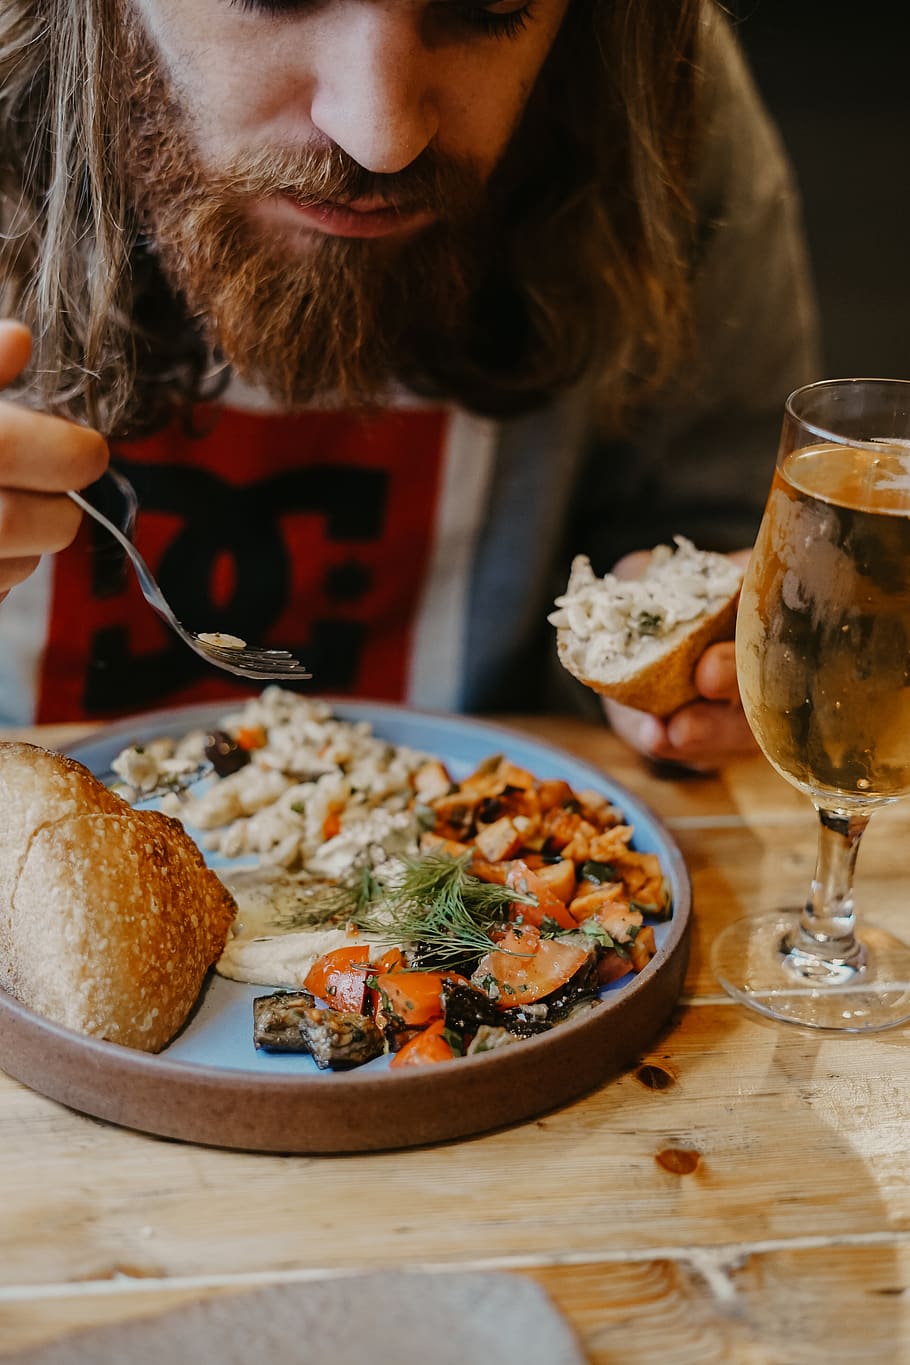 man eating bread and plate near filled wine glass, person, human